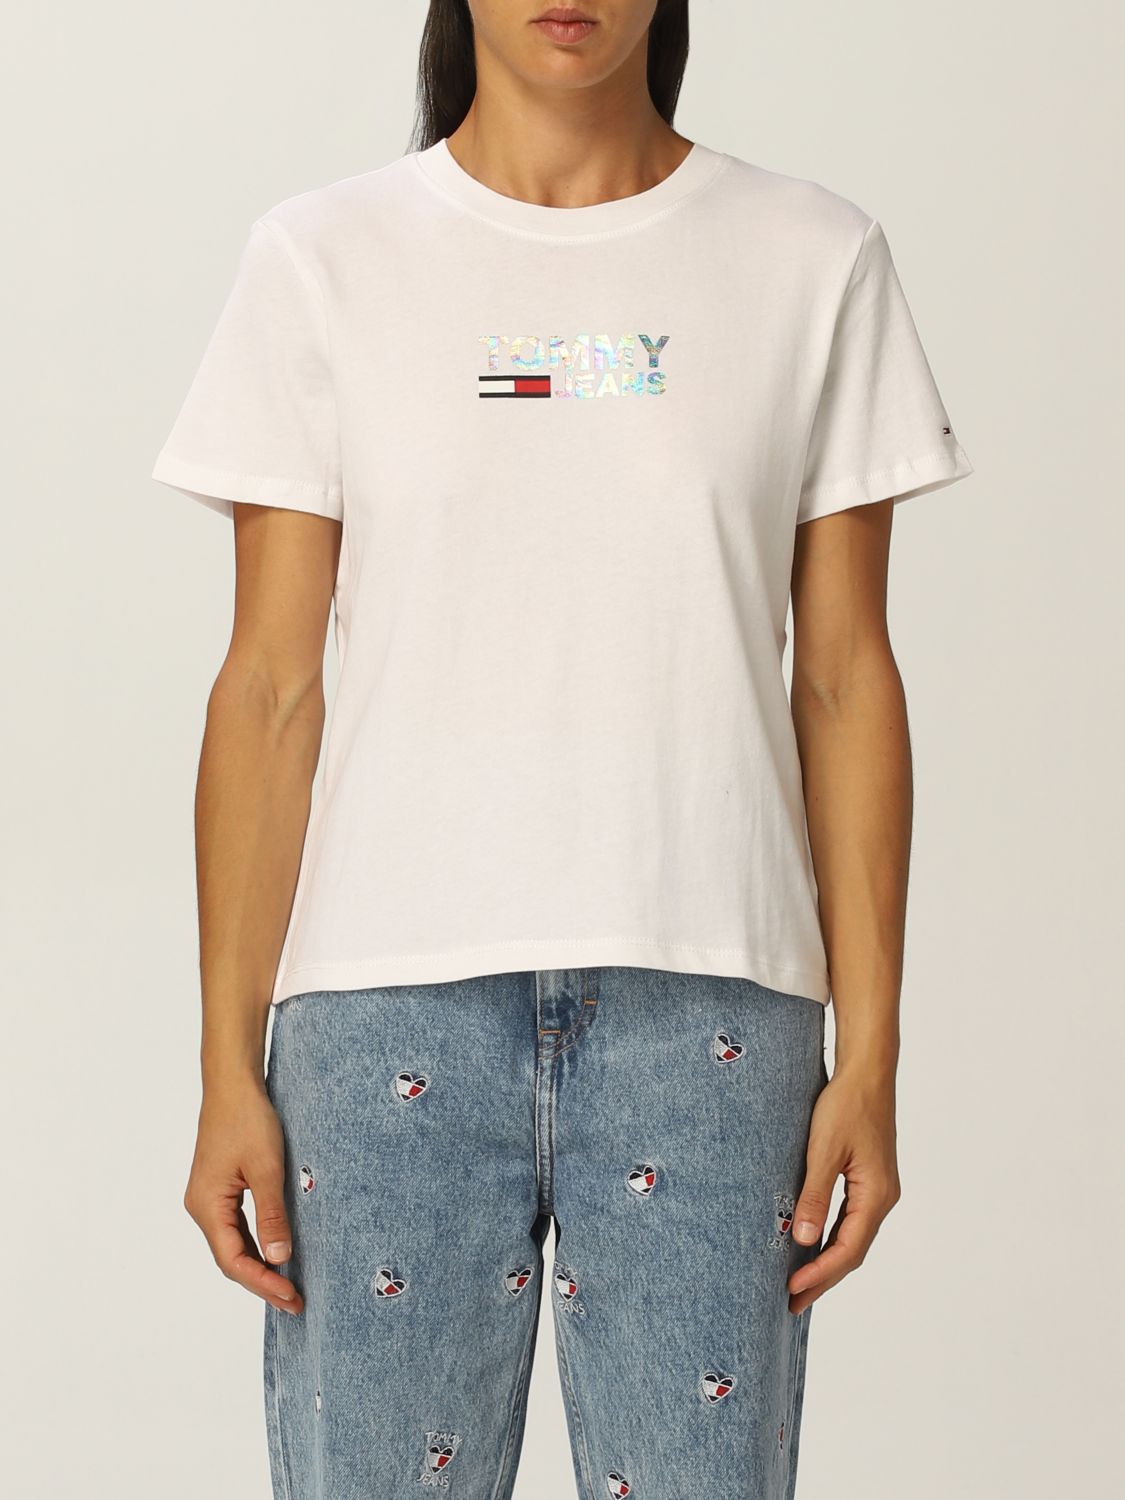 TOMMY HILFIGER: T-shirt women | T-Shirt Tommy White | T-Shirt Tommy DW0DW10419 GIGLIO.COM